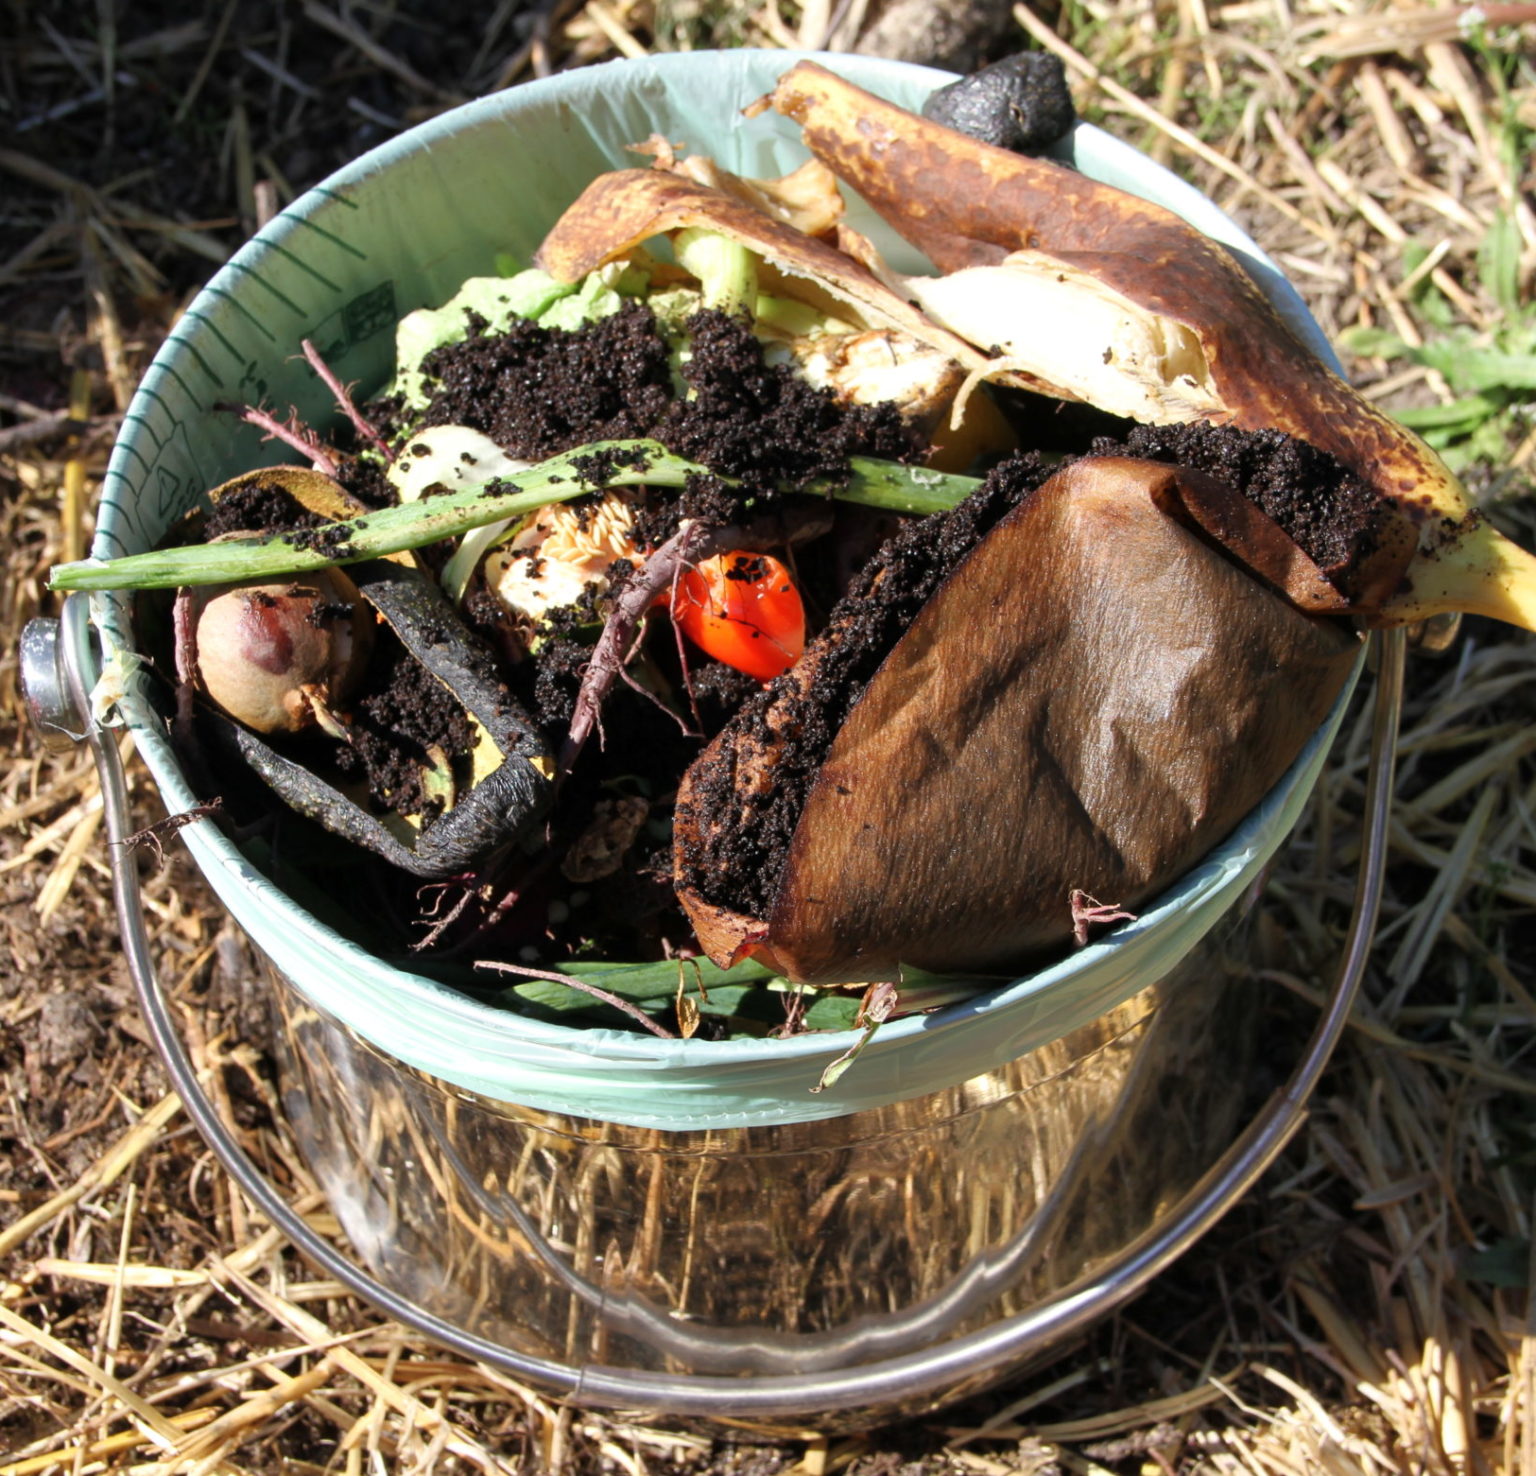 Typical Compostable Kitchen Waste Scaled E1594771611650 1536x1476 